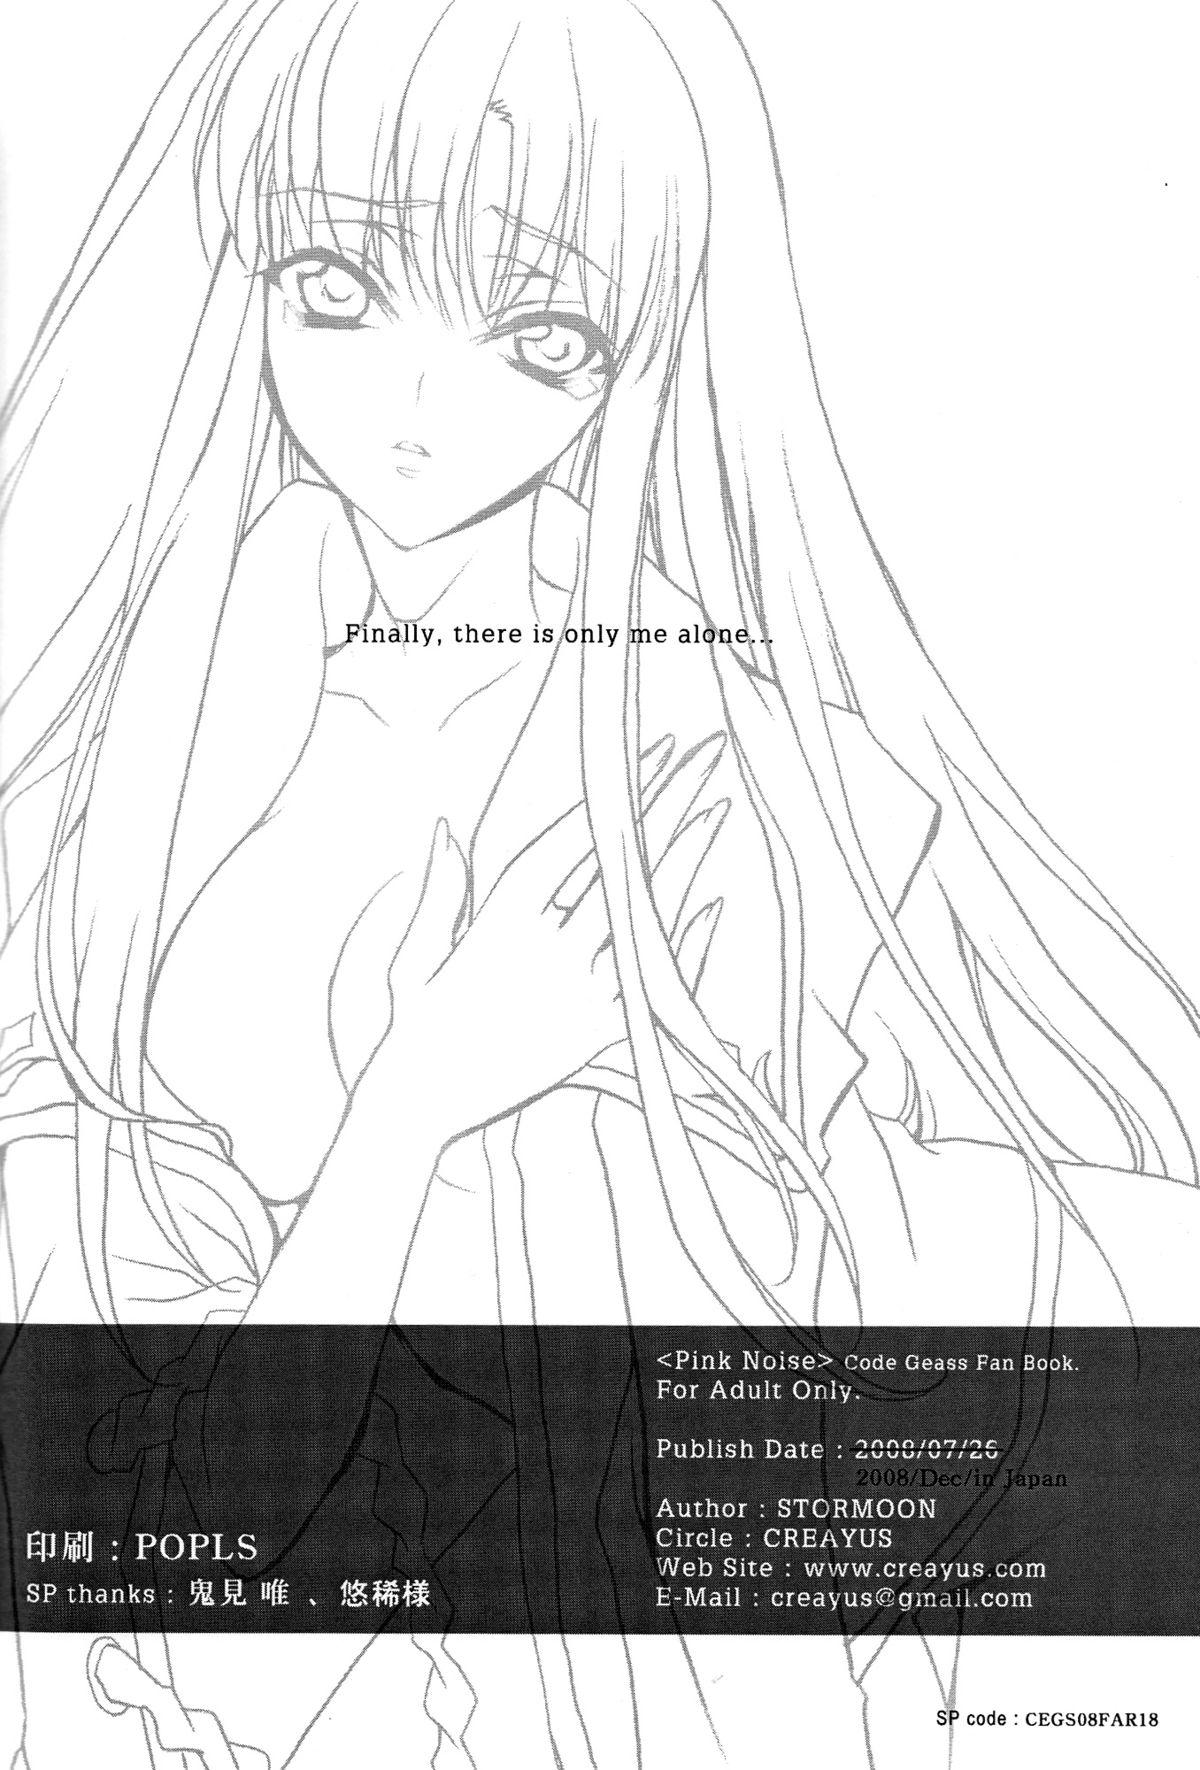 Vintage Pink Noise - Code geass Couple Porn - Page 36